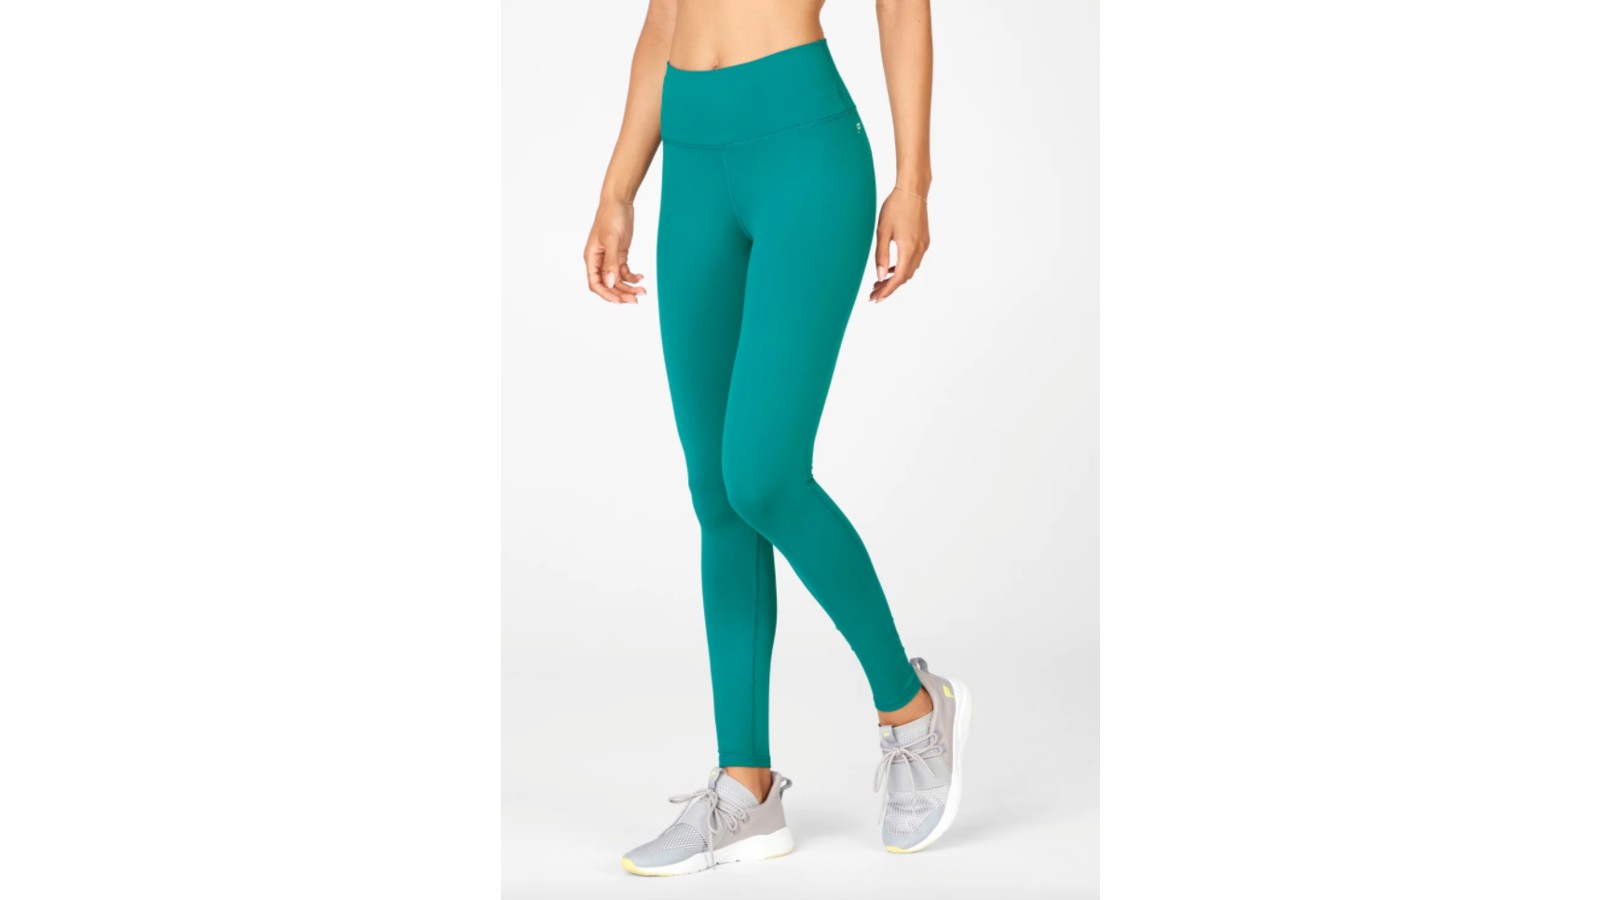 Fabletics leggings review: Do the PowerHold leggings live up to